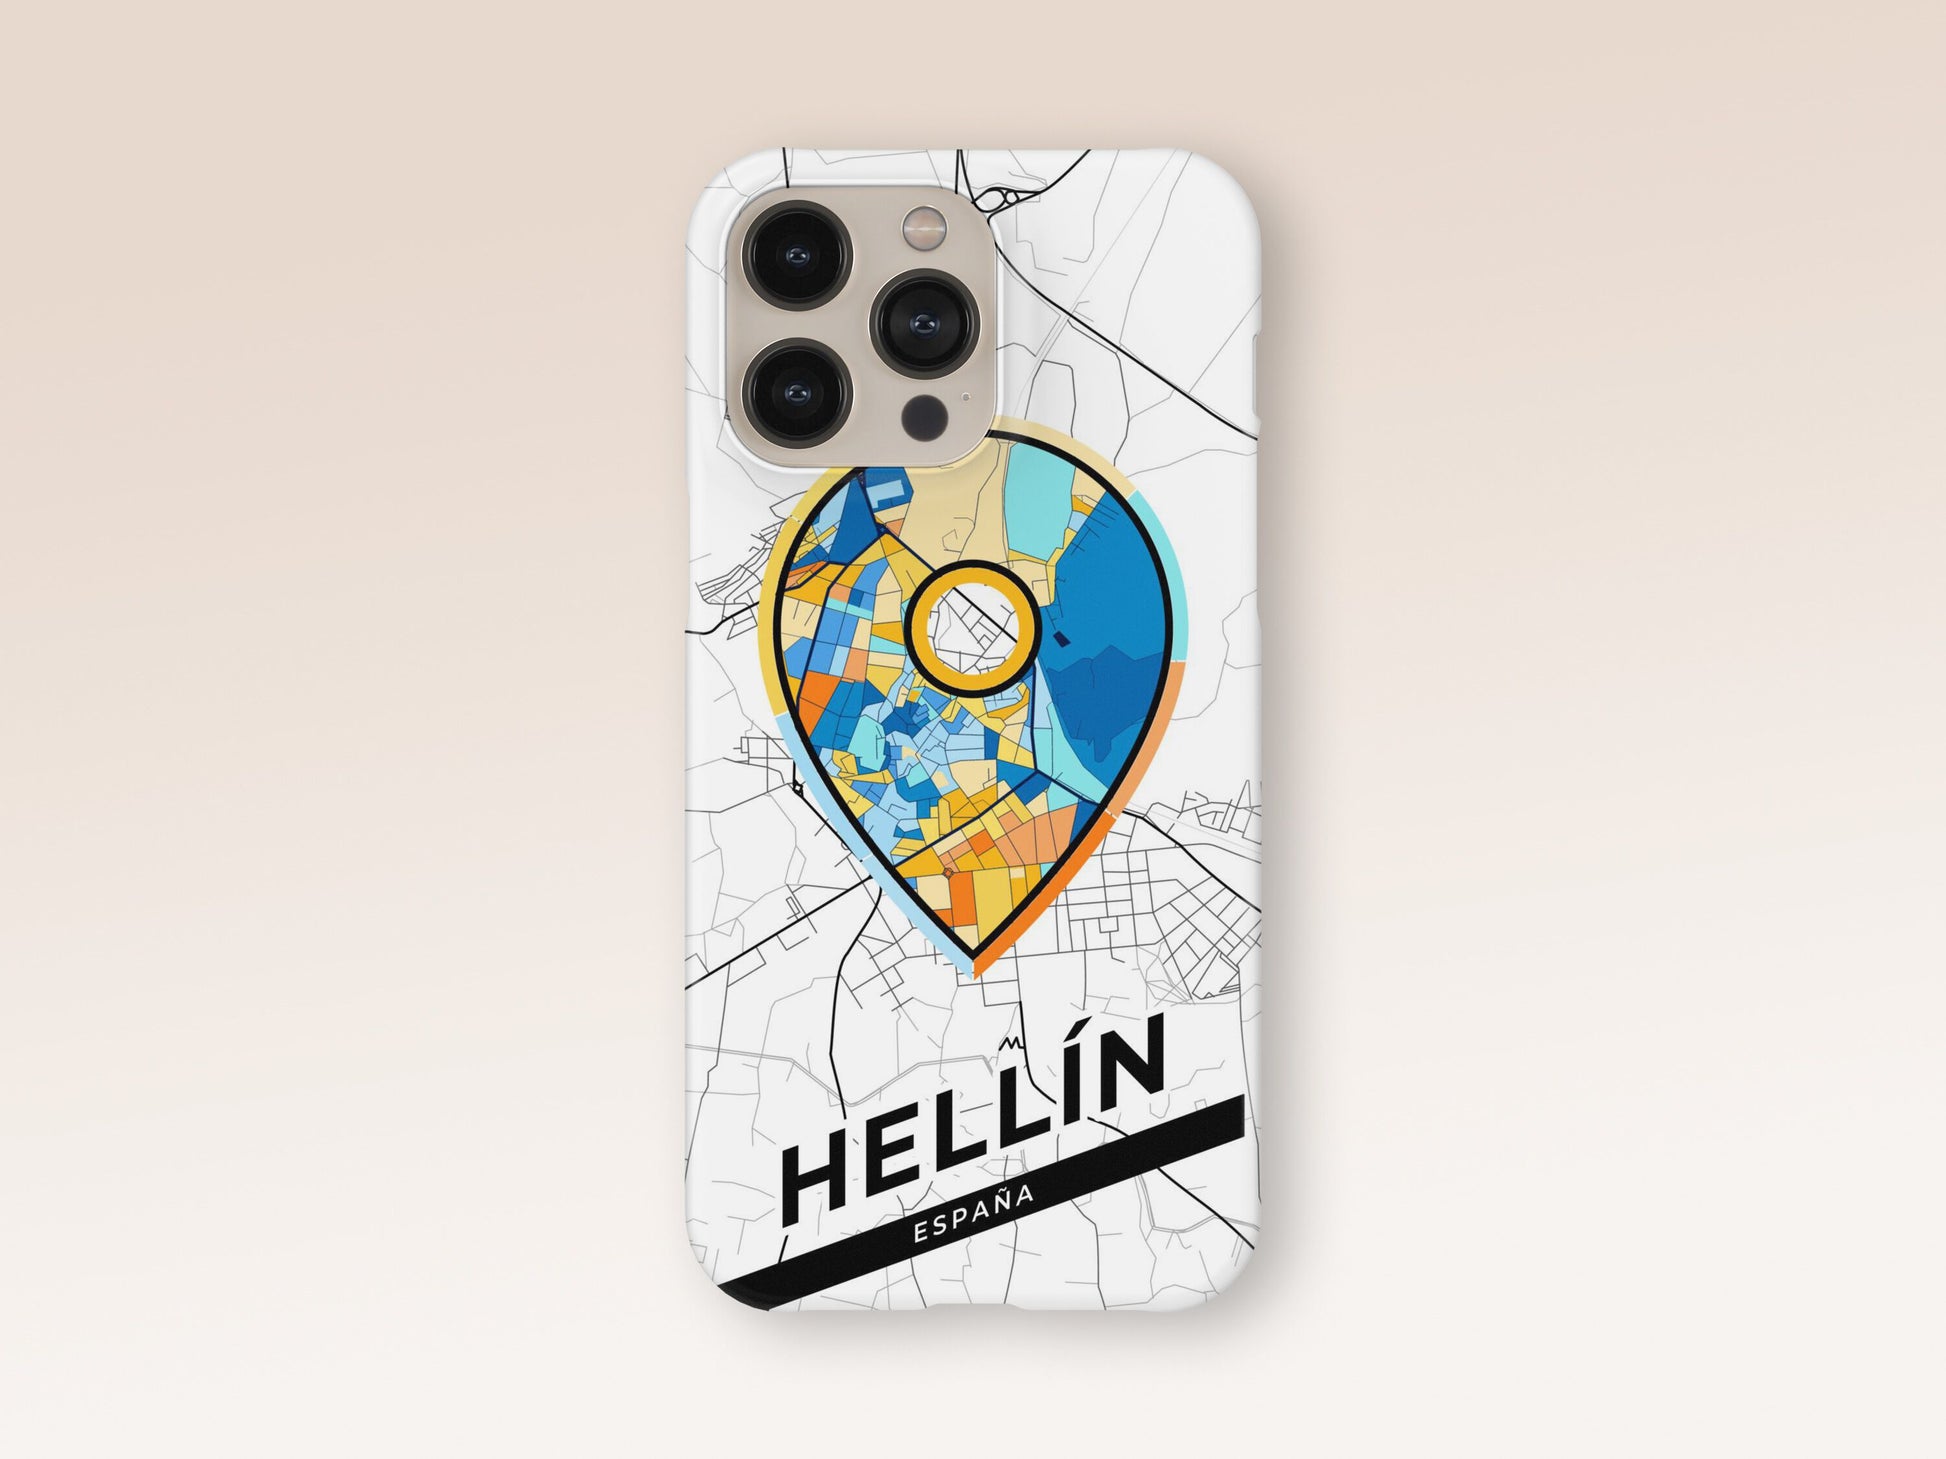 Hellín Spain slim phone case with colorful icon. Birthday, wedding or housewarming gift. Couple match cases. 1